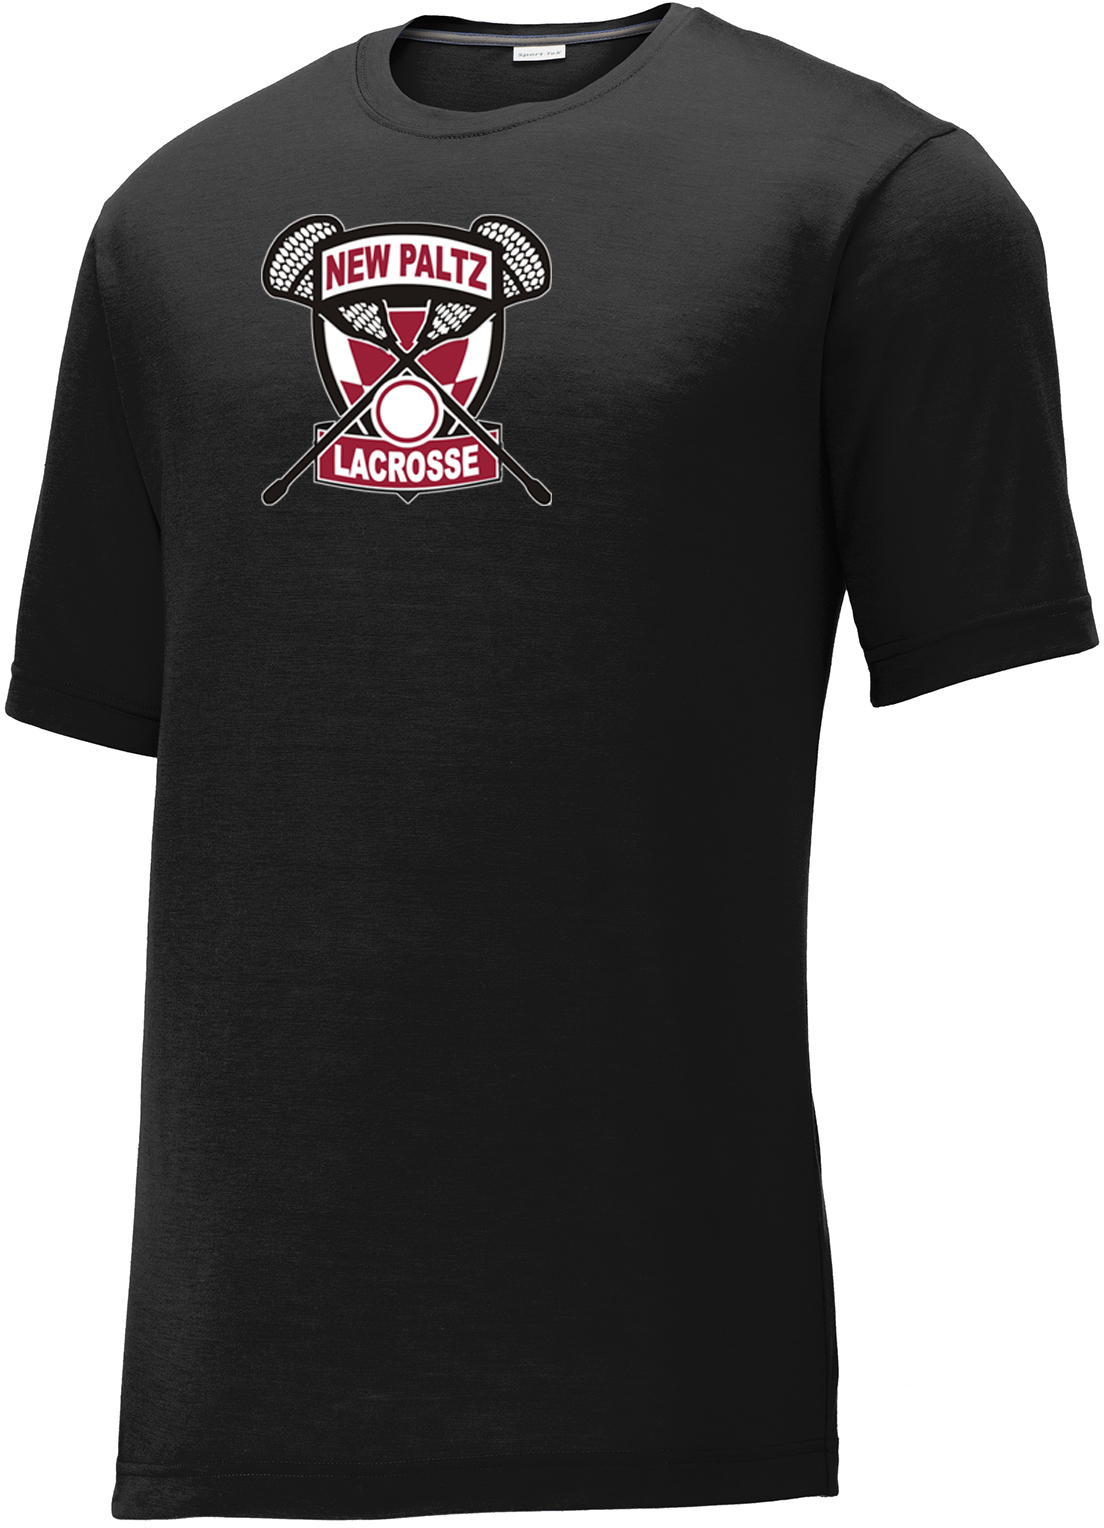 New Paltz Youth Lacrosse Mens CottonTouch Performance T-Shirt